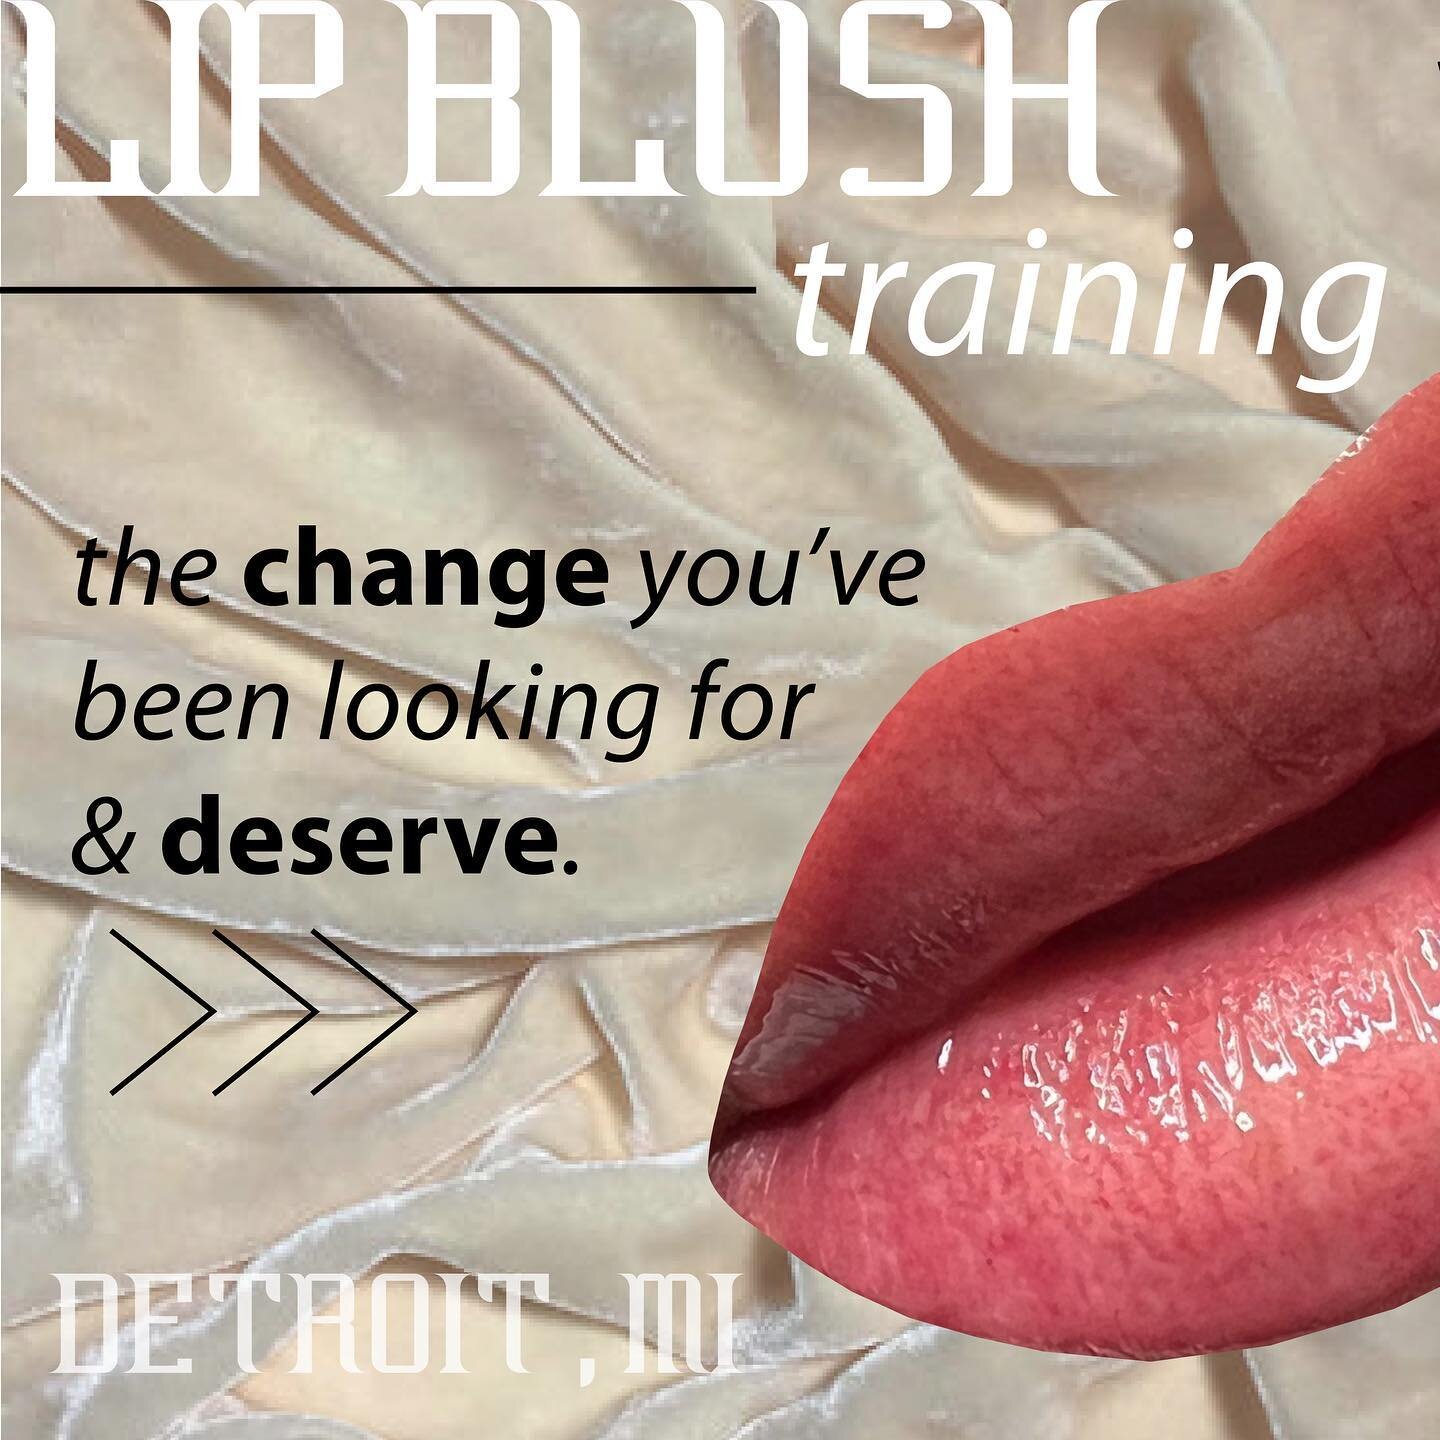 BIG MOVES + BIG LOVE 🖤

Our 2022 course schedule was originally slated to come to an end last month, but the babes have spoken and are ready to make moves!

We&rsquo;ve had a crazy number of inquiries regarding group lip blush training, so here it i